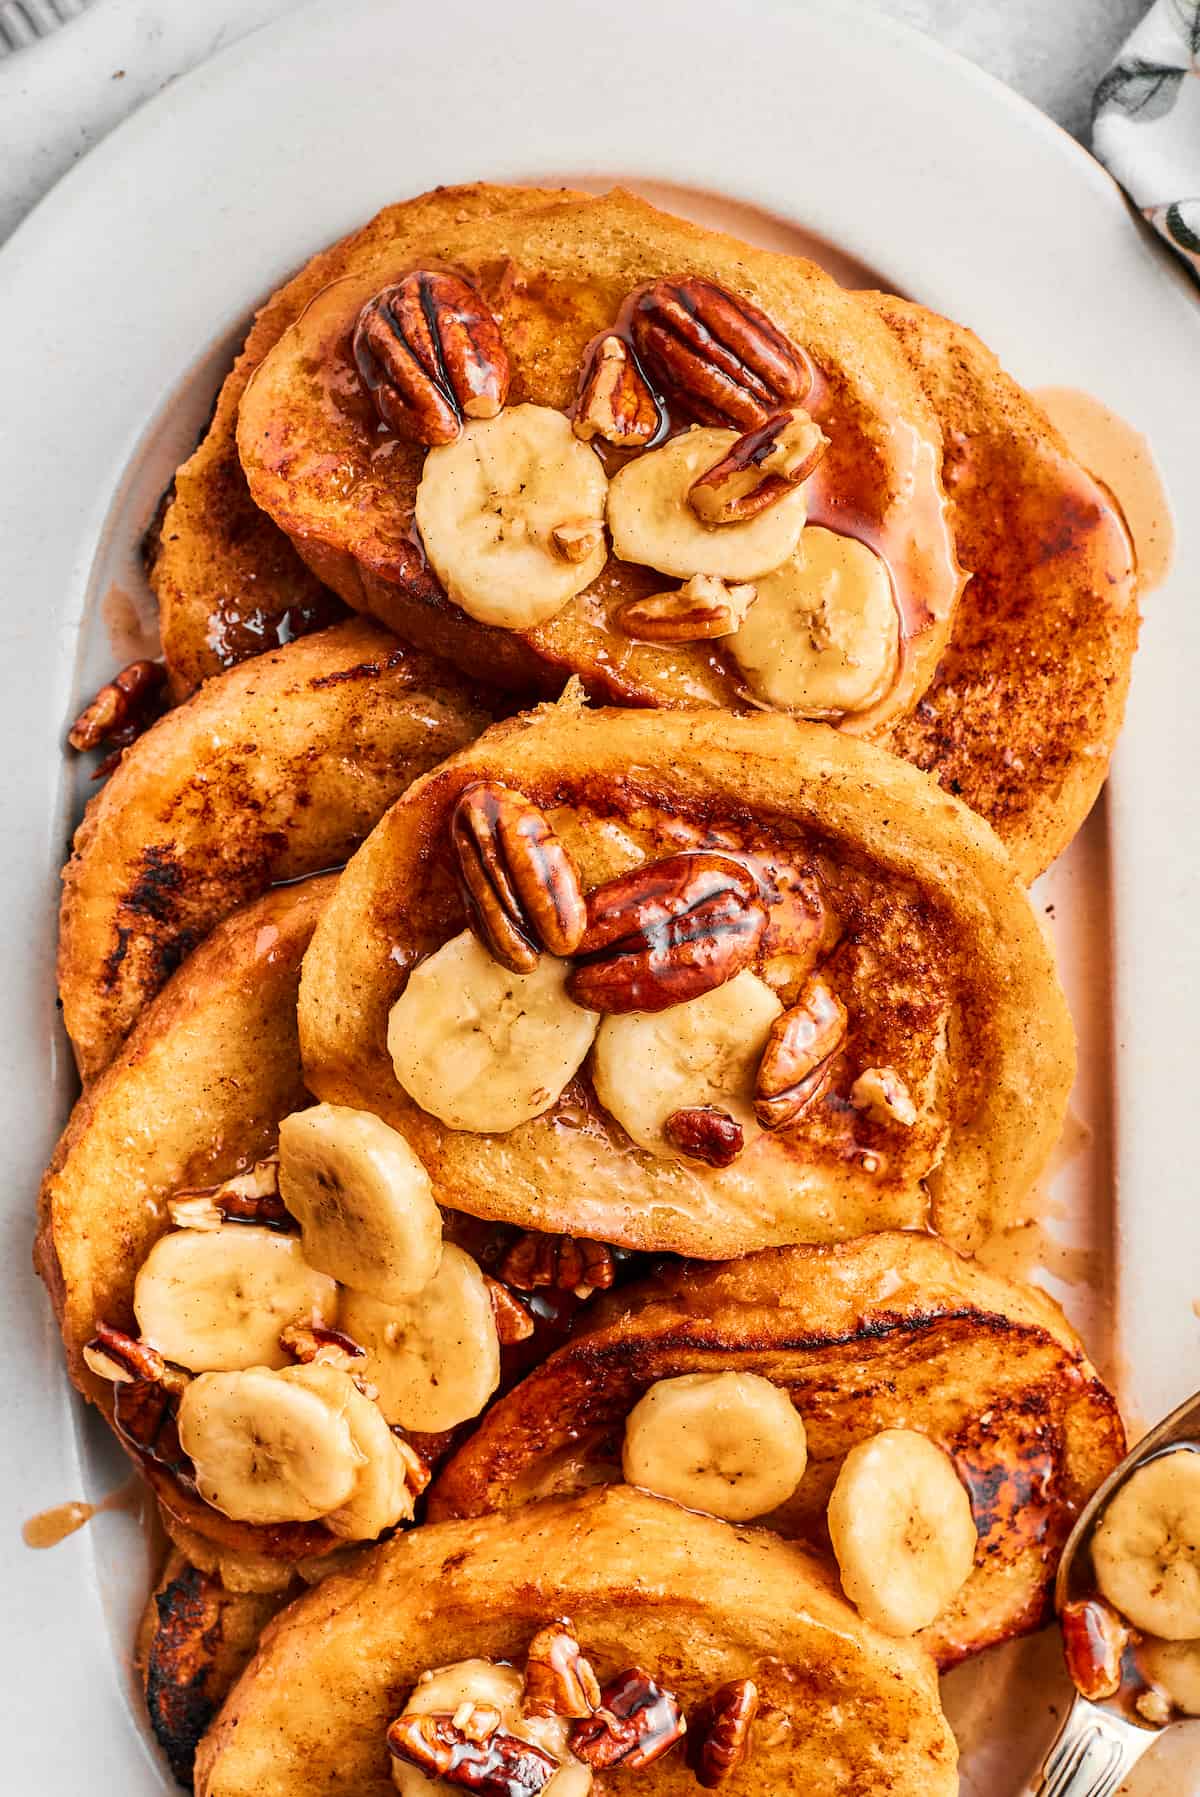 Slices of bananas foster French toast are piled on a serving platter.